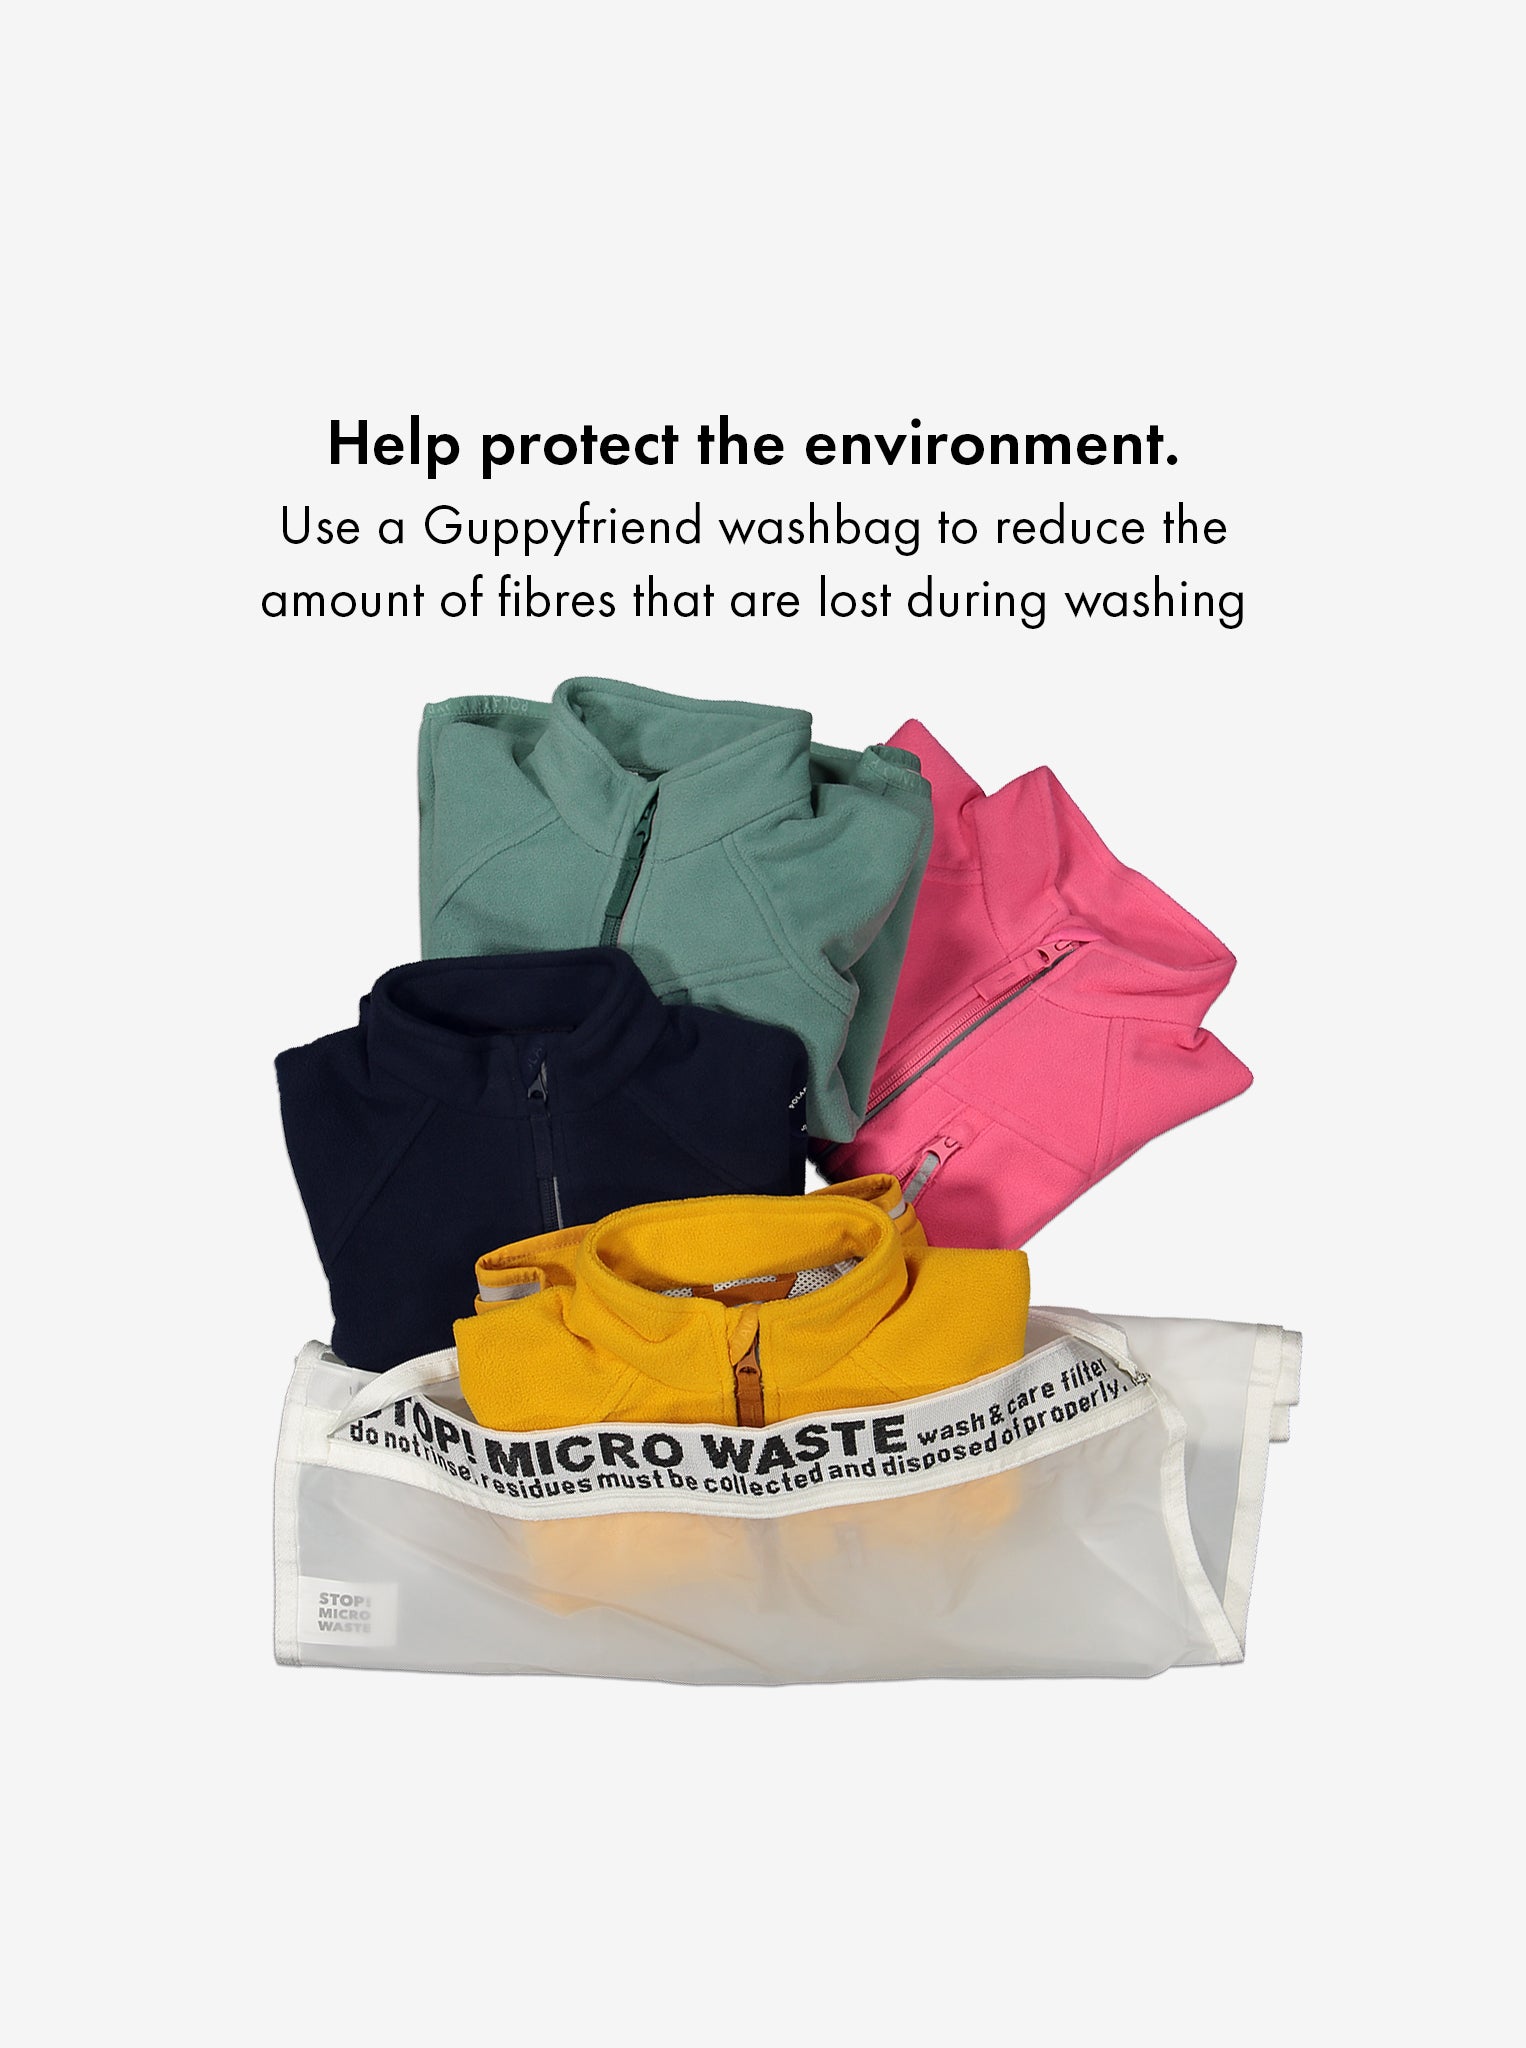 An eco-friendly Guppy Friend washbag used for kids waterproof fleece jacket in colours green, pink, navy, and yellow.